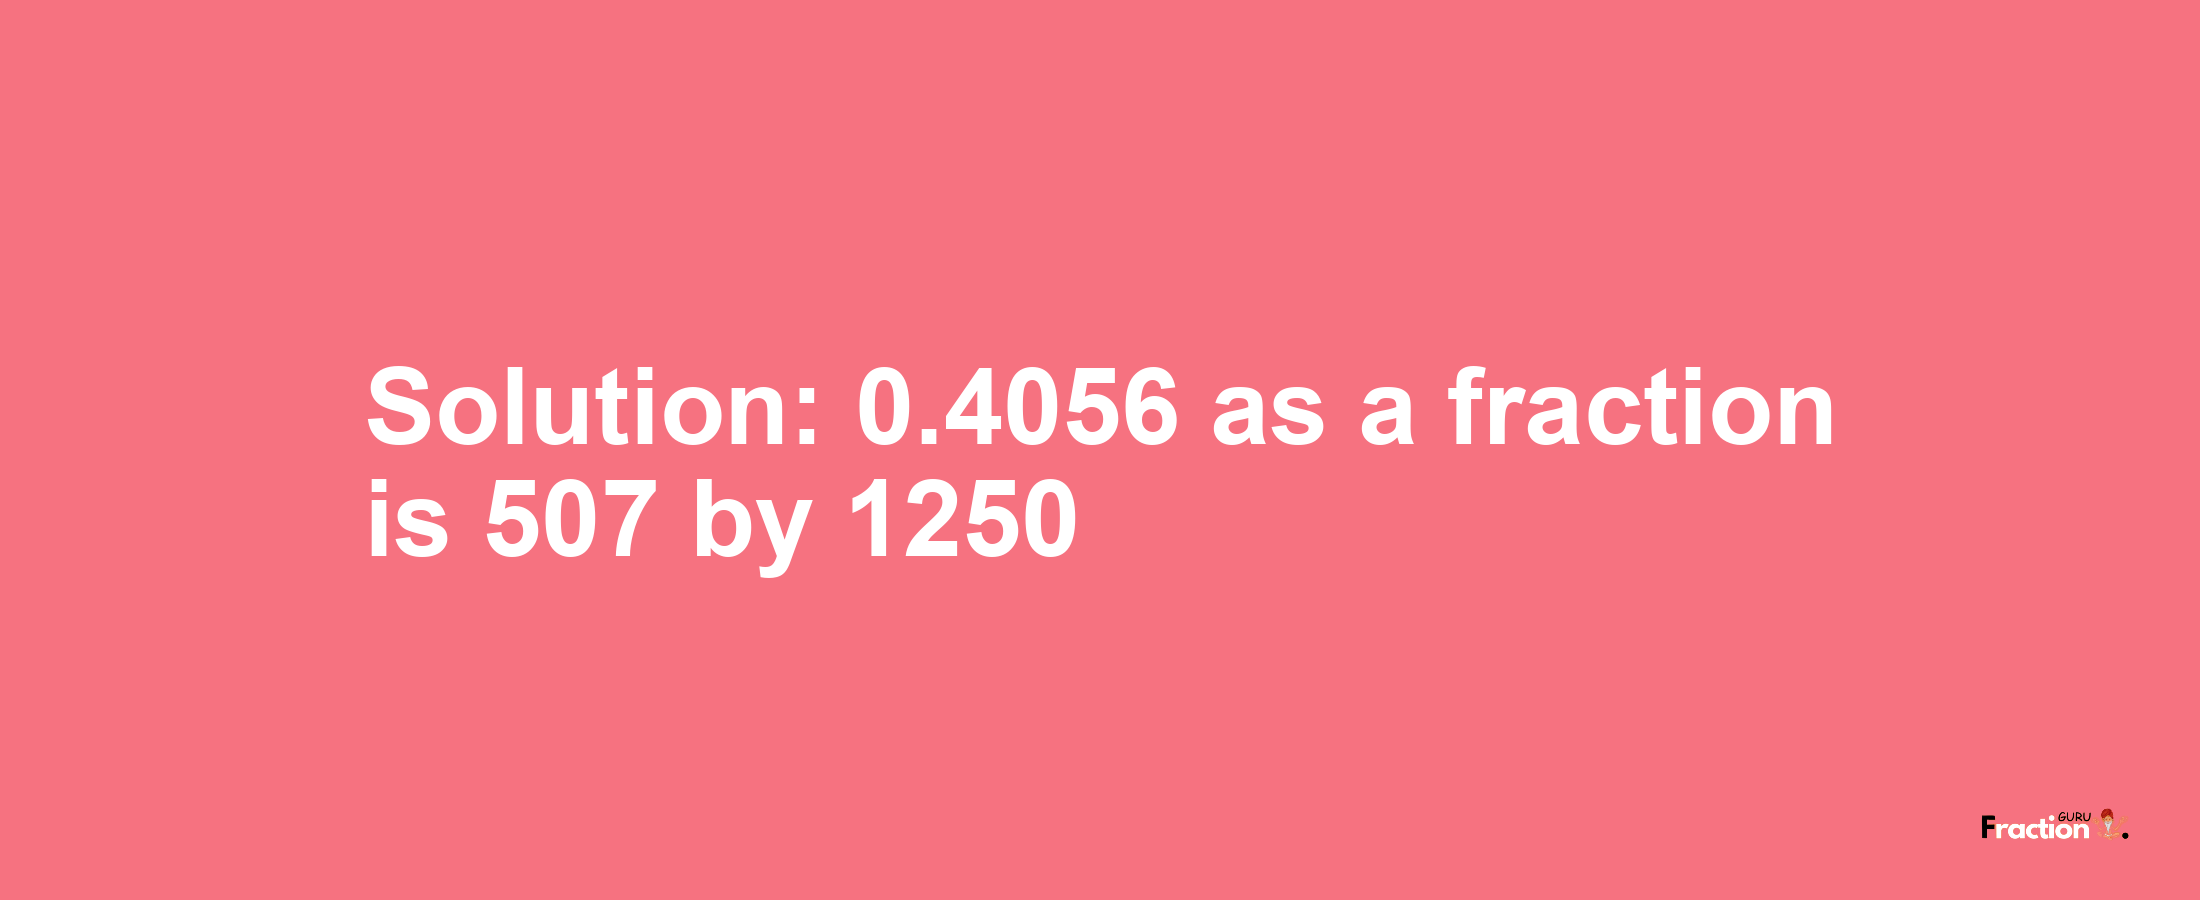 Solution:0.4056 as a fraction is 507/1250